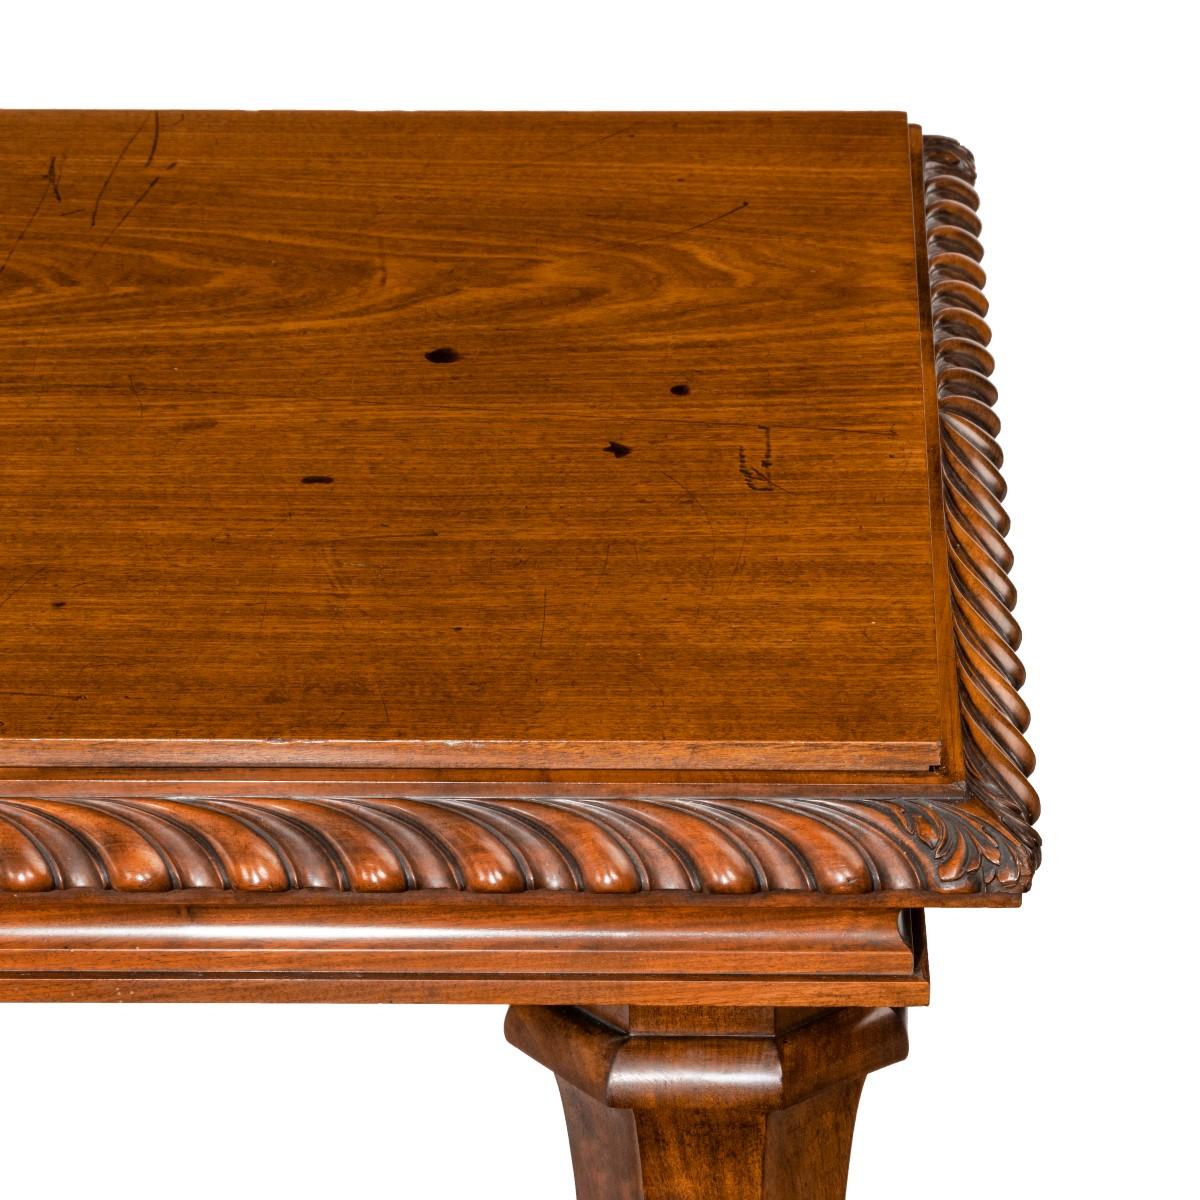 Mahogany Centre Table from Clumber Park, Seat of the 7th Duke of Newcastle 1